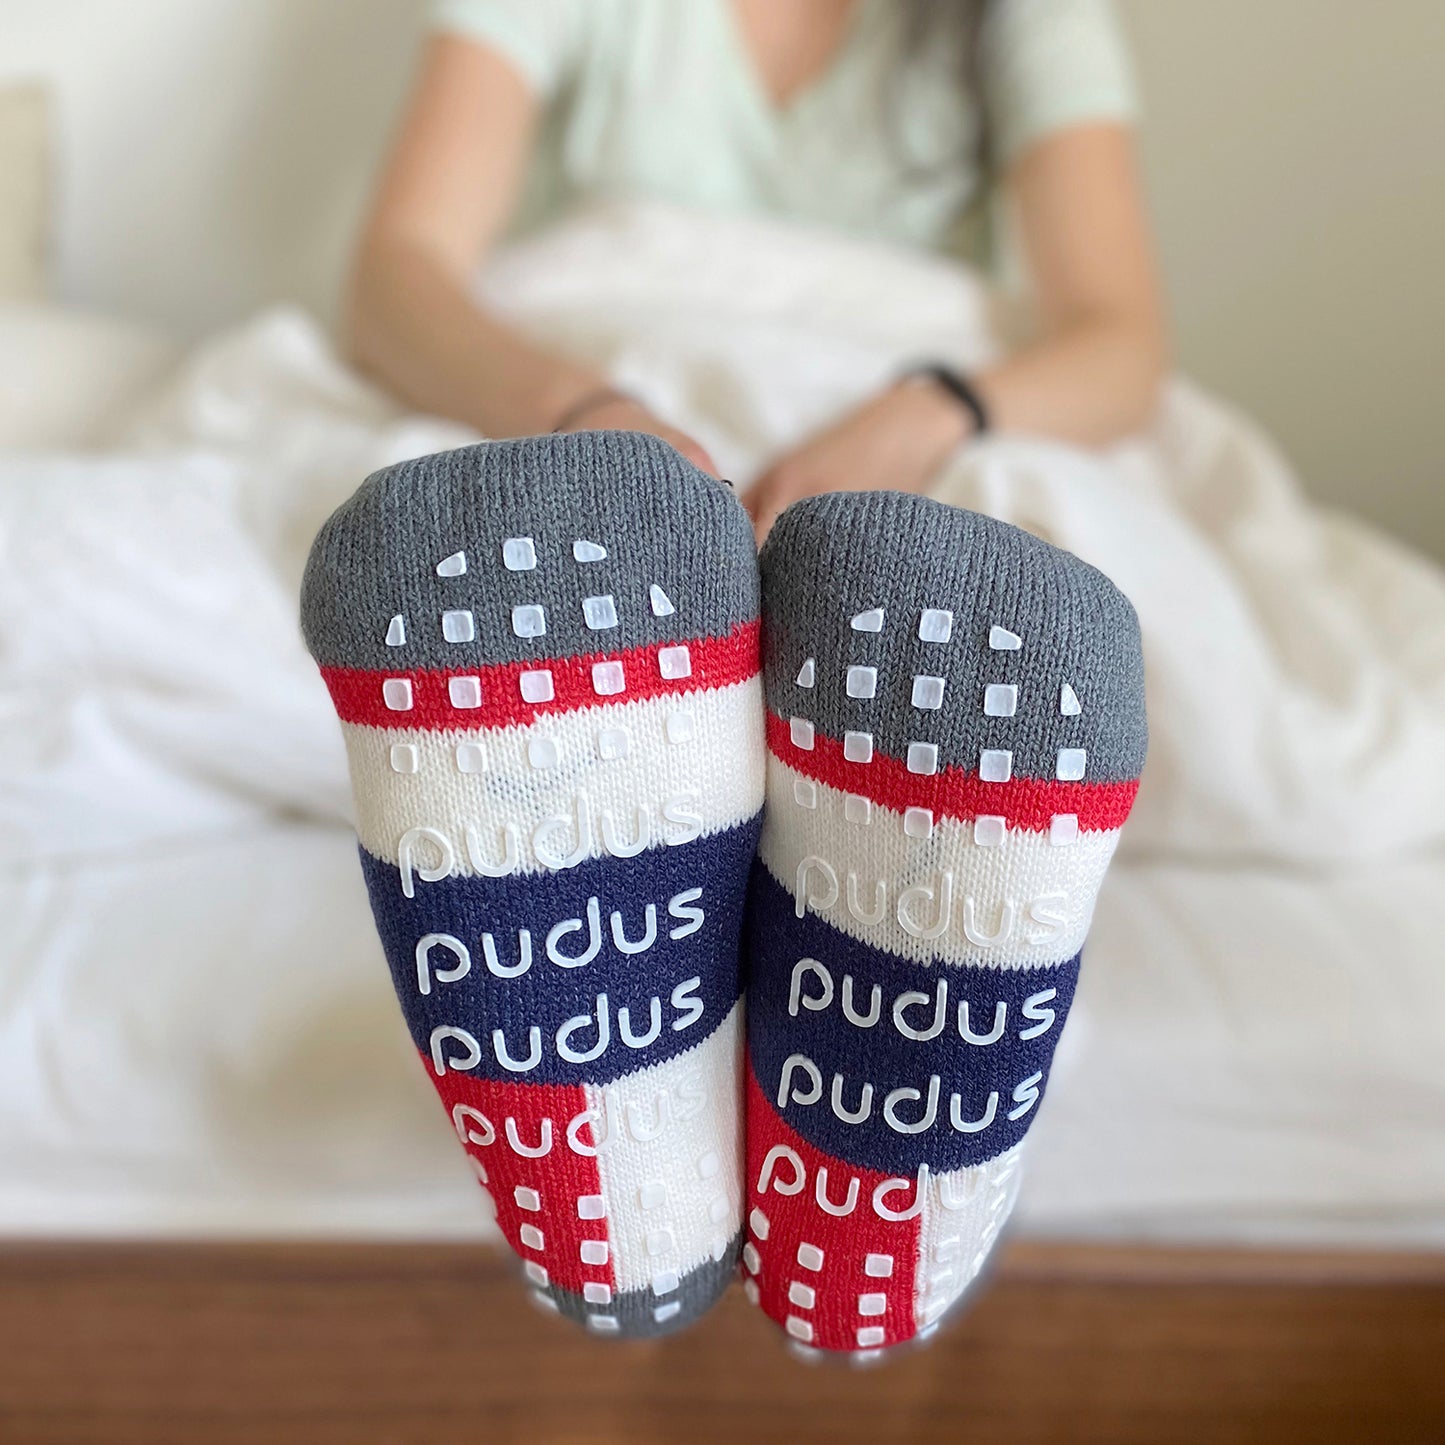 Pudus Cozy Winter Slipper Socks for Women and Men with Non-Slip Grippers and Faux Fur Sherpa Fleece - Adult Regular Fuzzy Socks Lone Star - Classic Slipper Sock